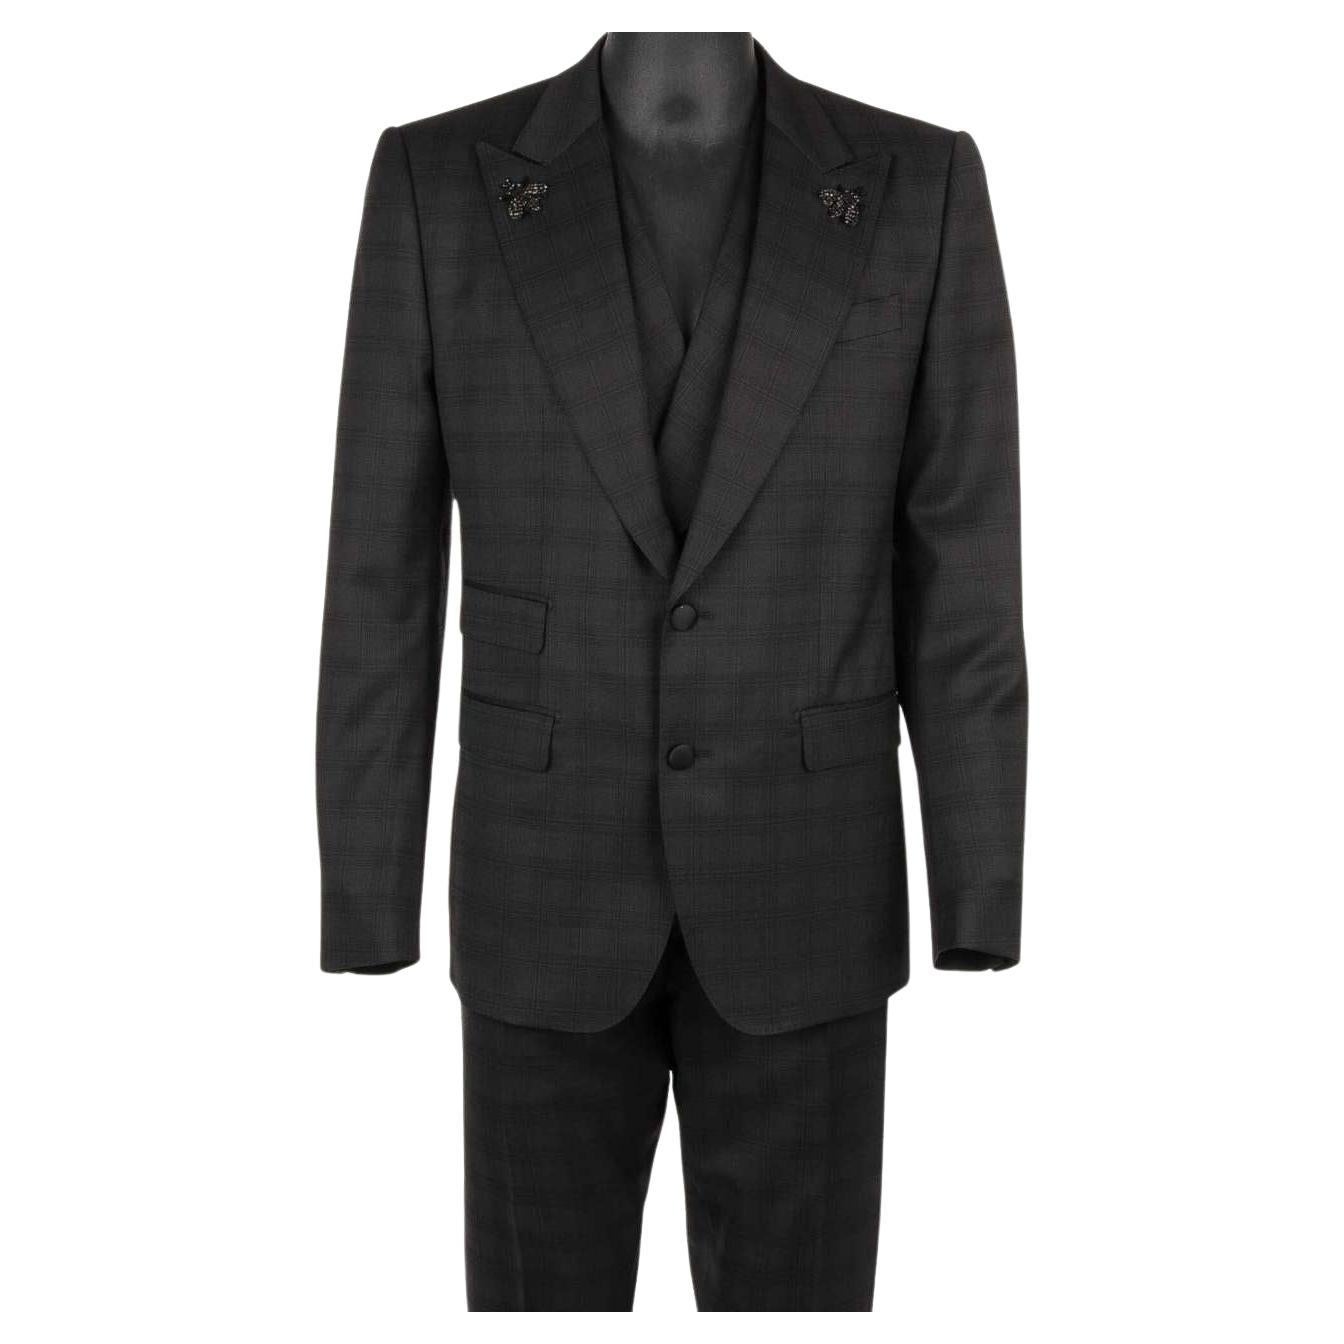 D&G 3 Piece Checked Suit Jacket Waistcoat Bee Brooch SICILIA Black 50 For Sale